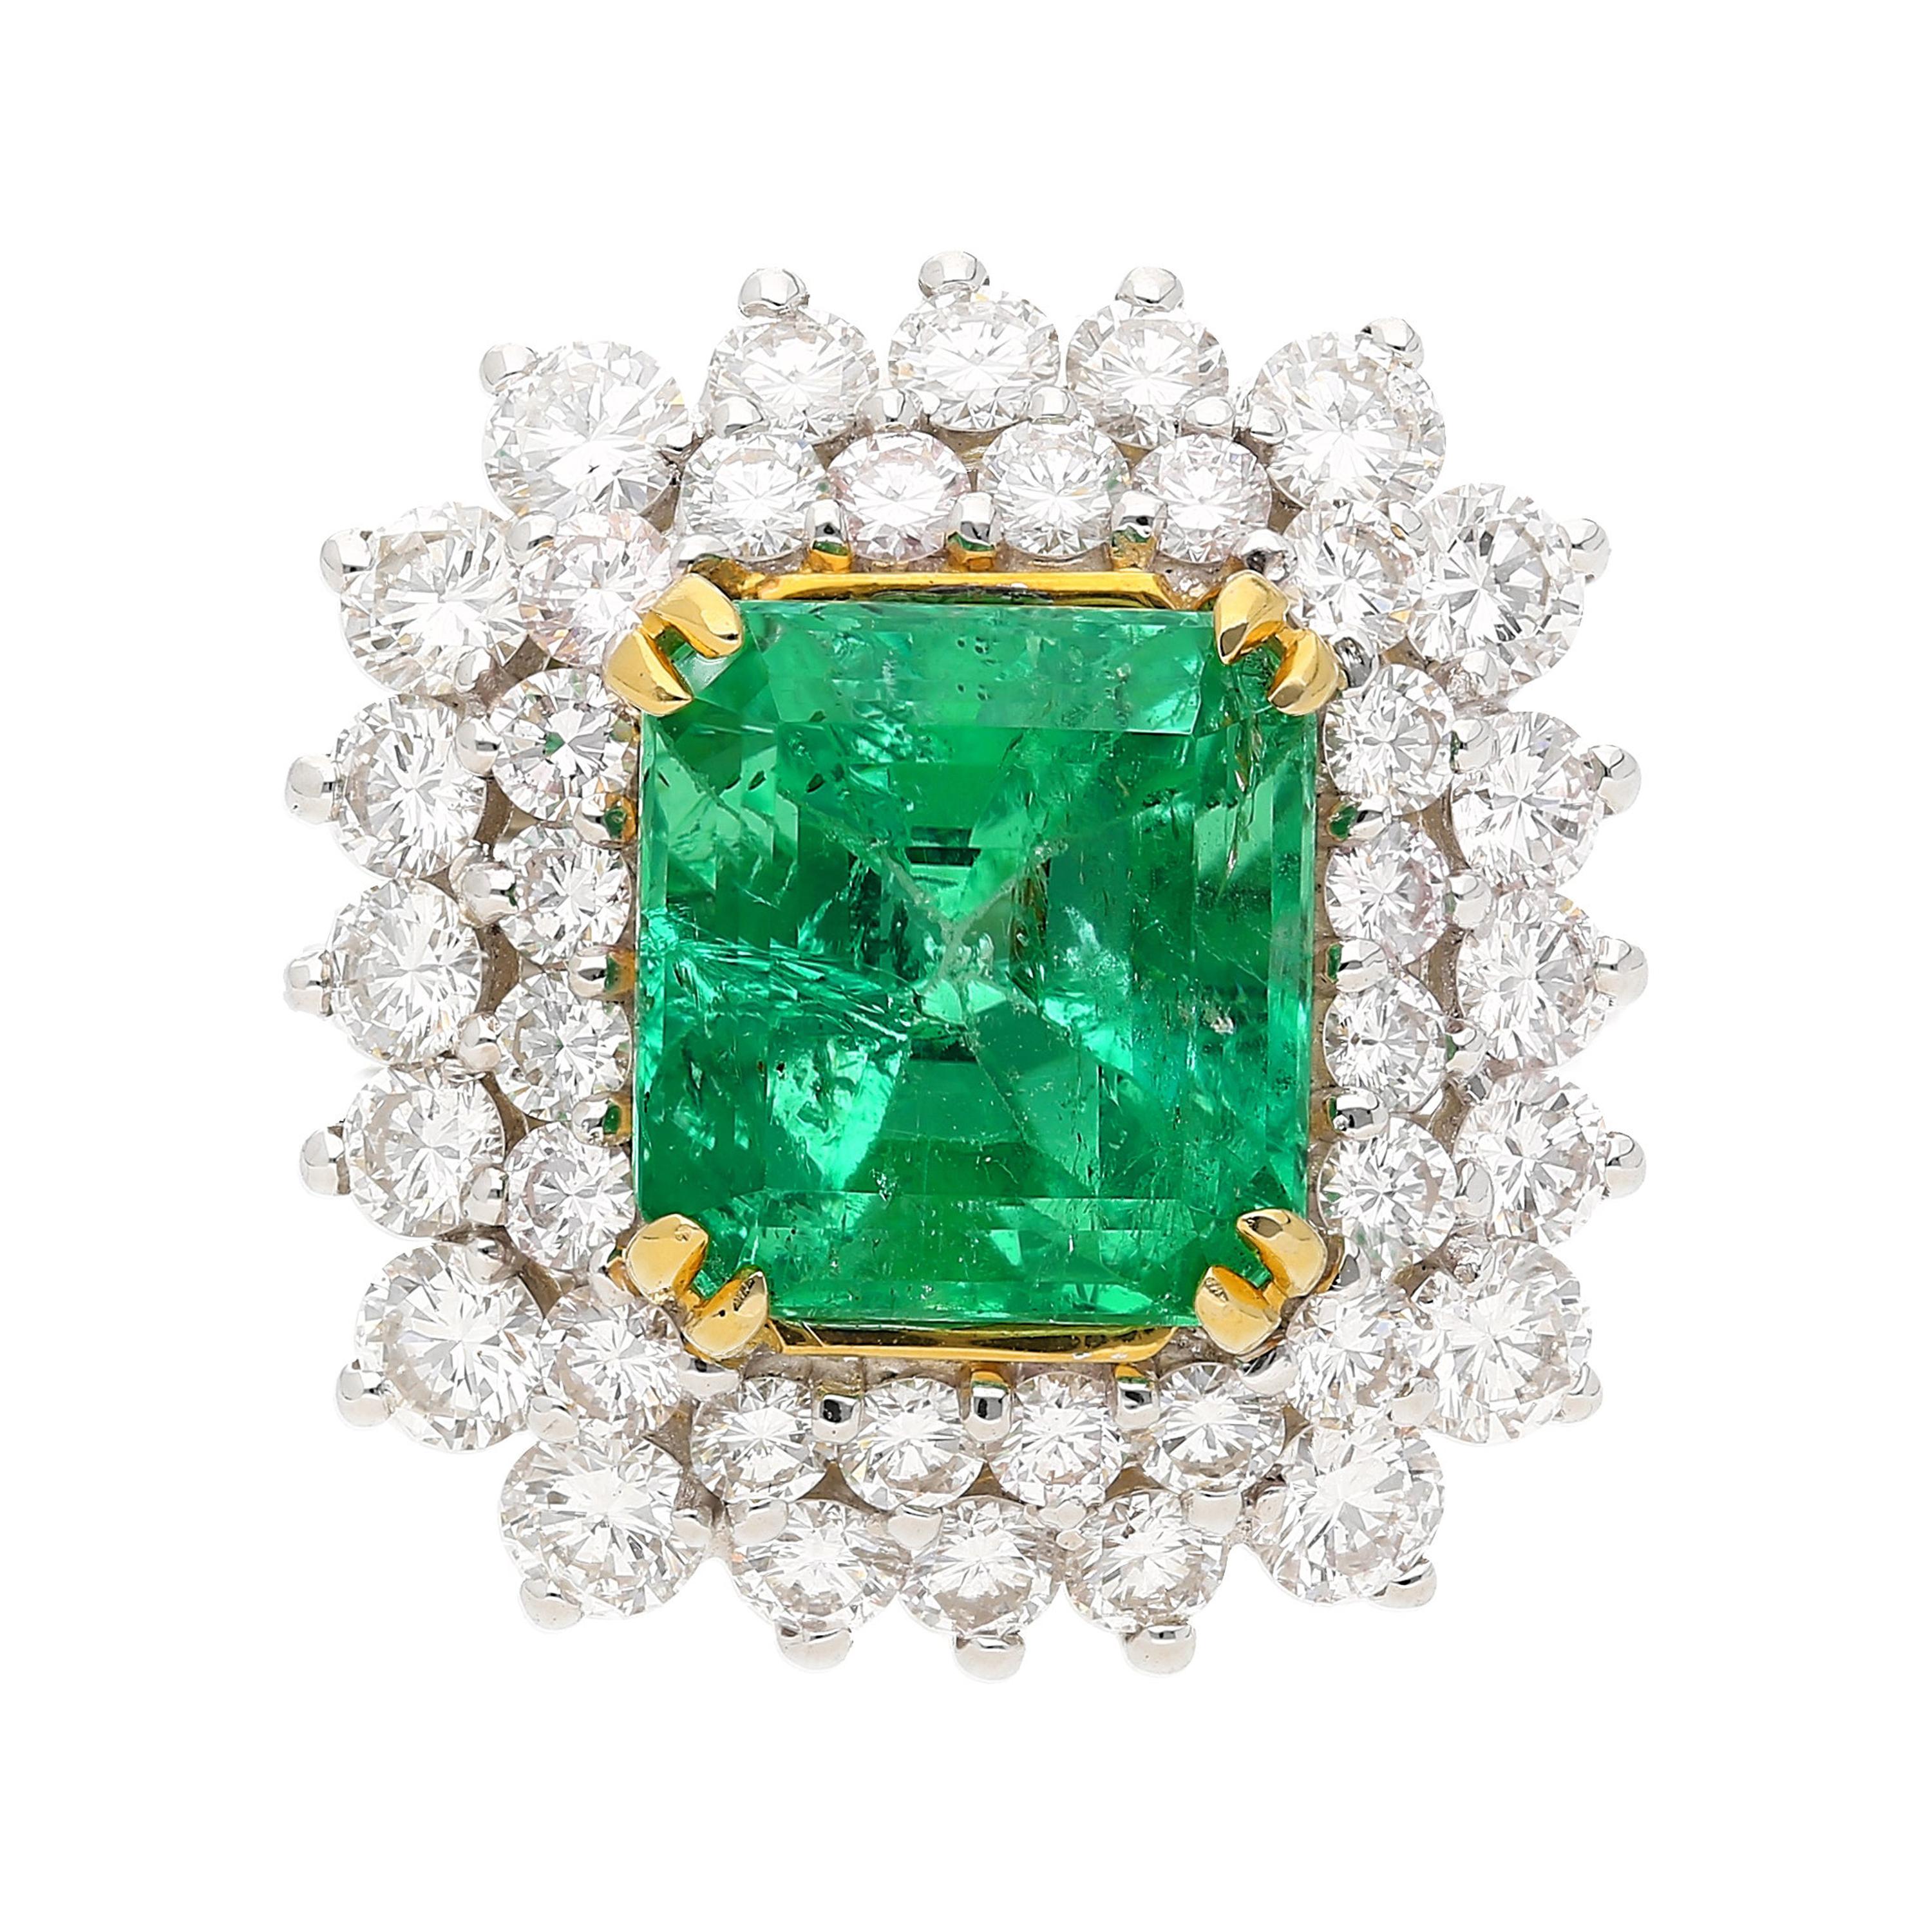 4.30 Carat Emerald-Cut Colombian Emerald Insignificant Oil GRS and Diamond Ring For Sale